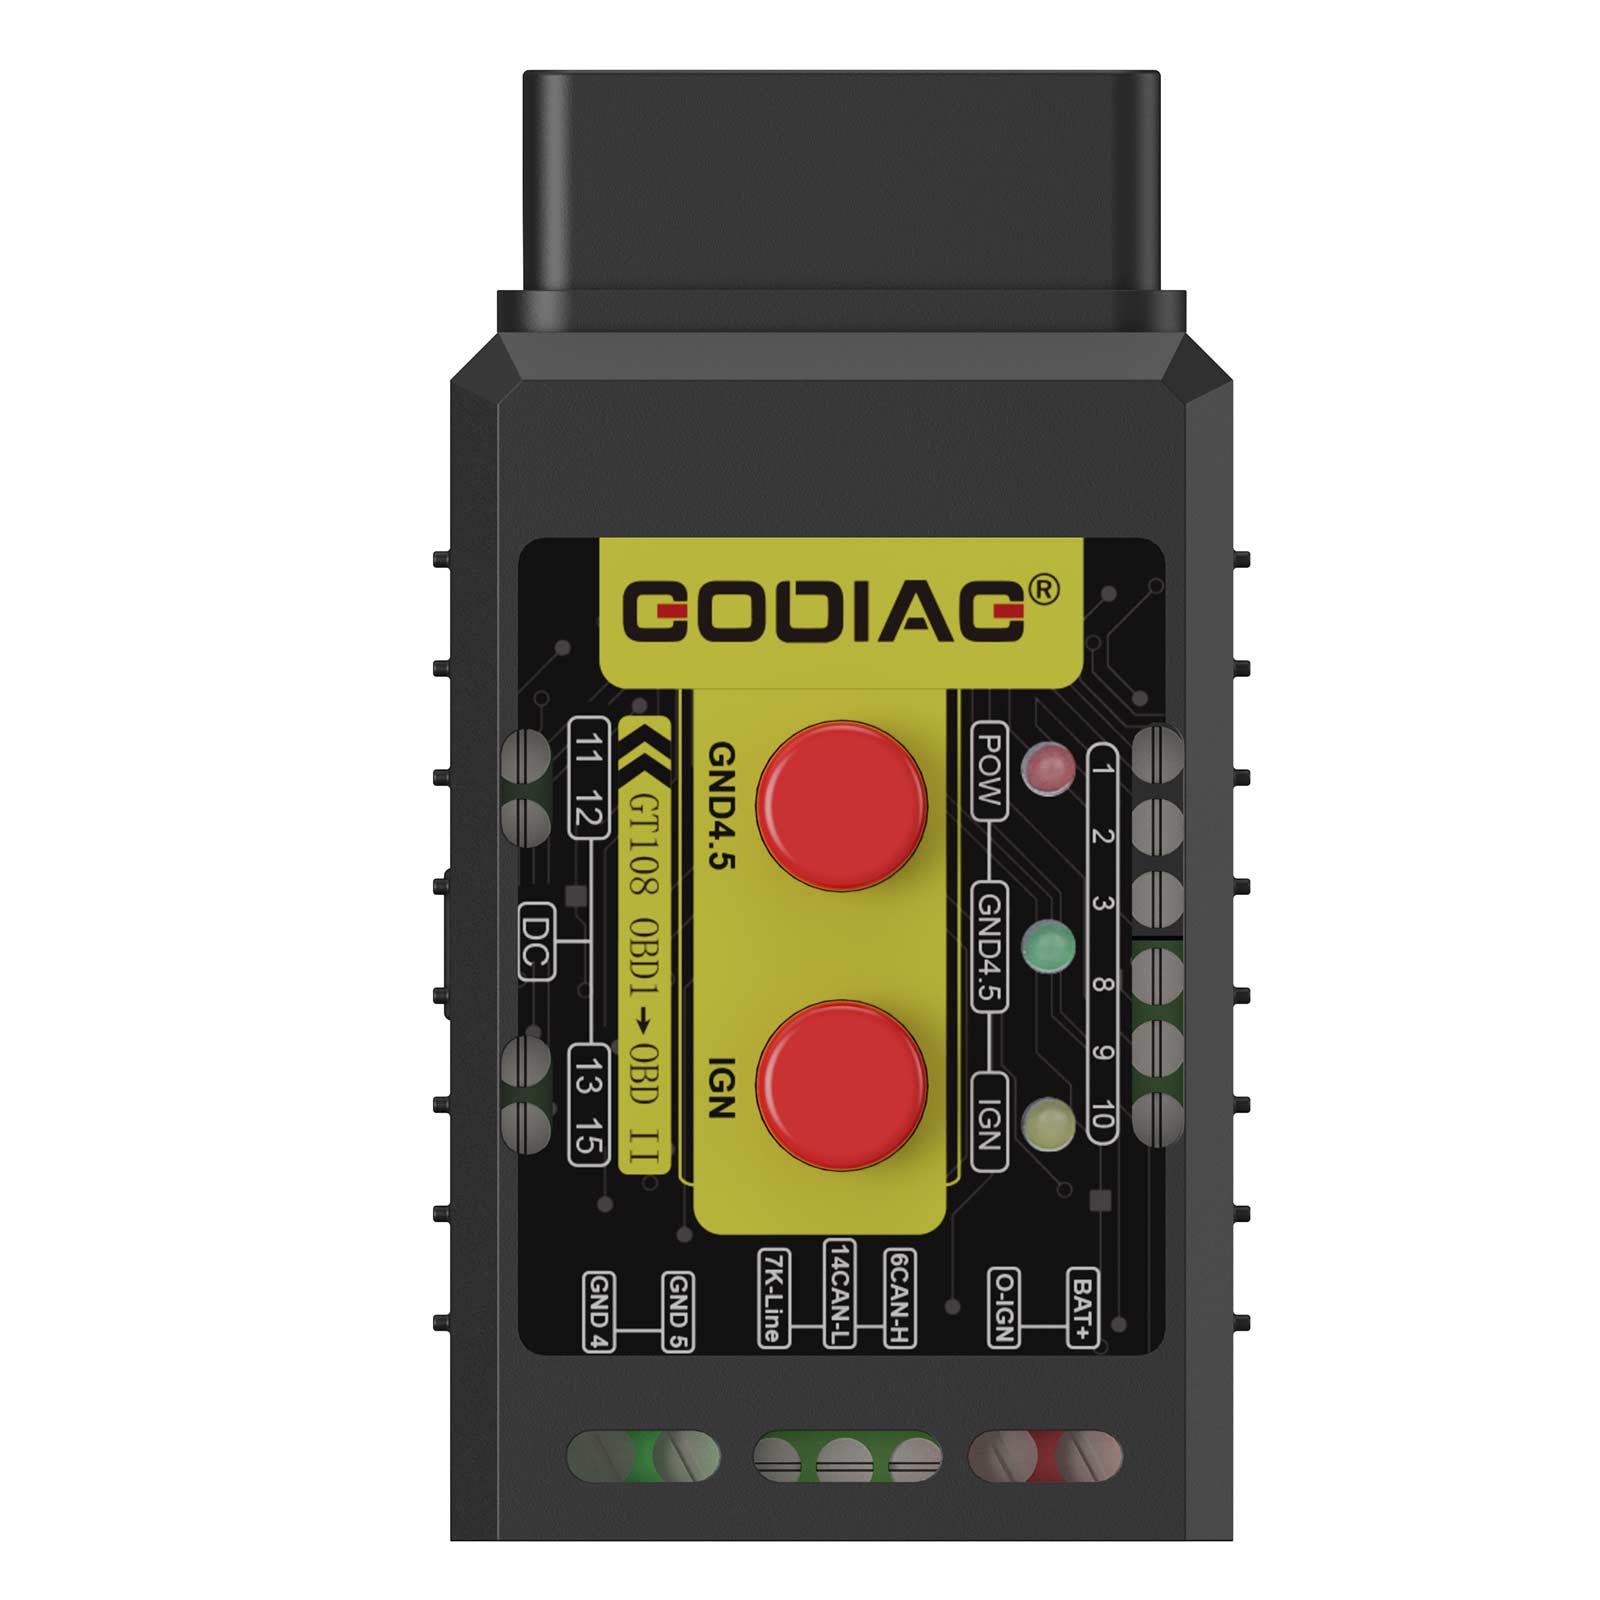 Godiag GT108 Super OBDI-OBDII Universal Conversion Adapter For Car, SUV, Truck, Tractor, Mining Vehicle, Generator, Boat, Motorcycle